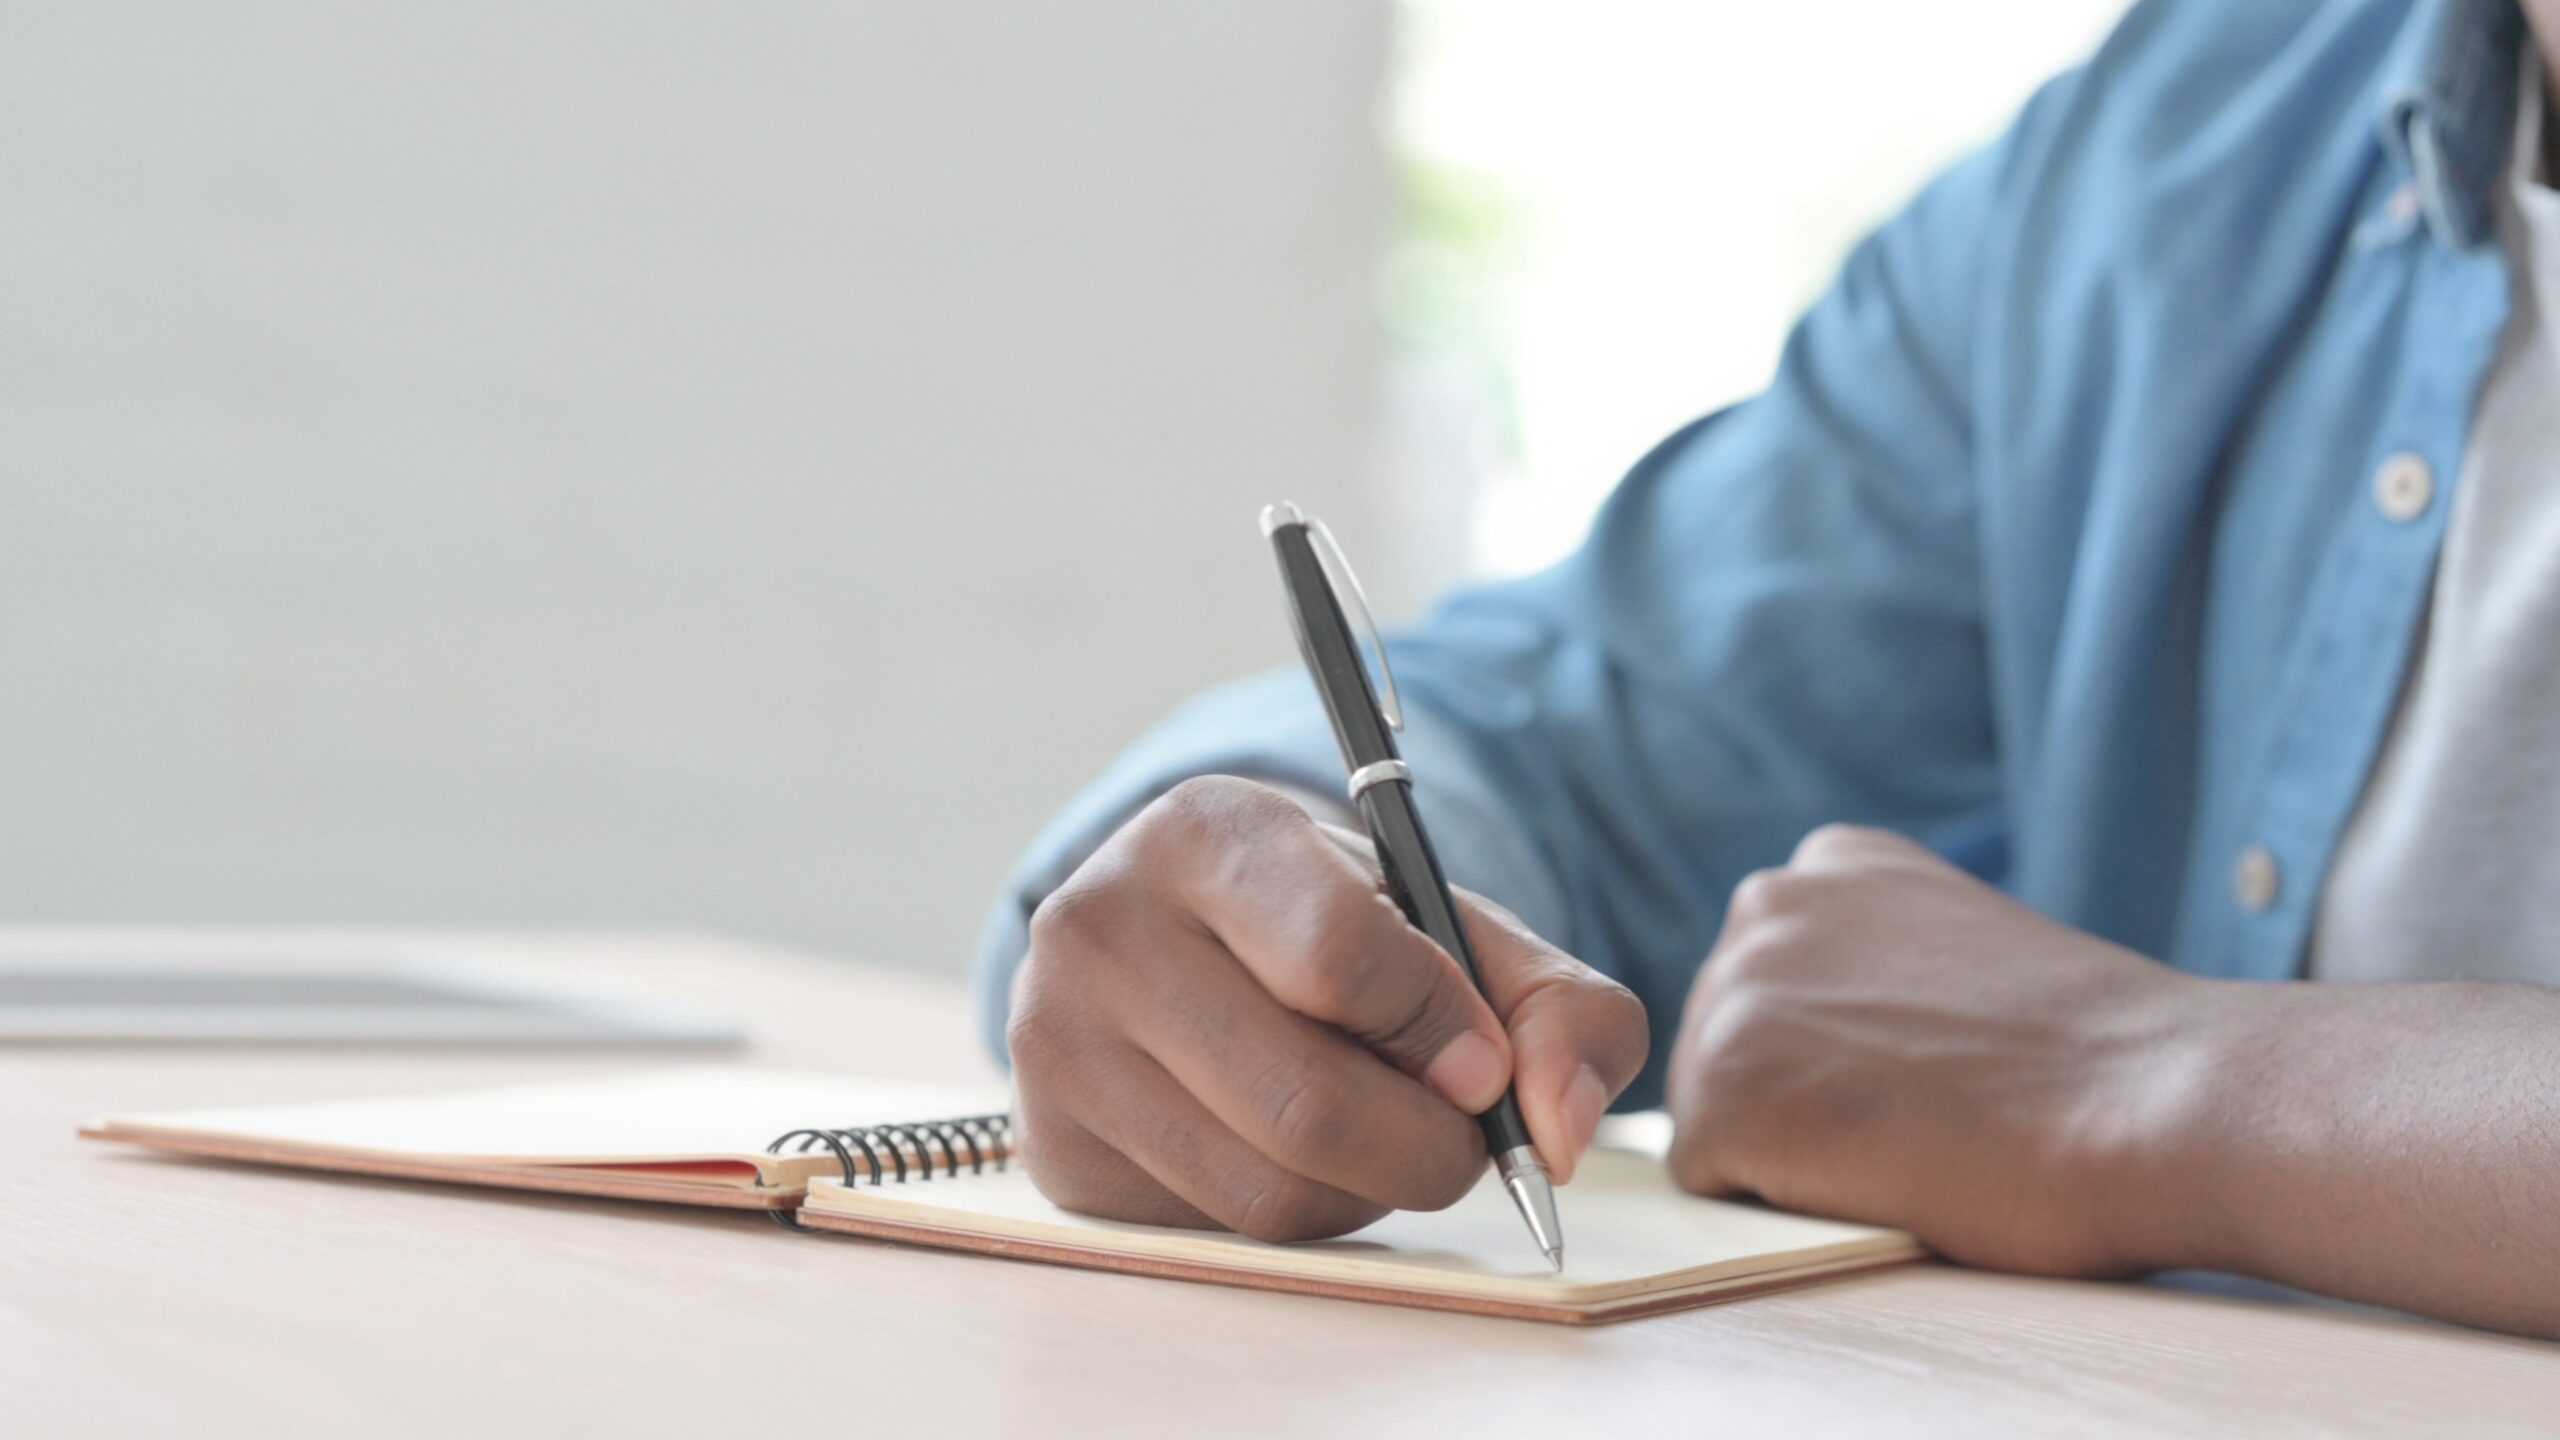 A man holding a pen, writing in a notebook while sitting at a desk.